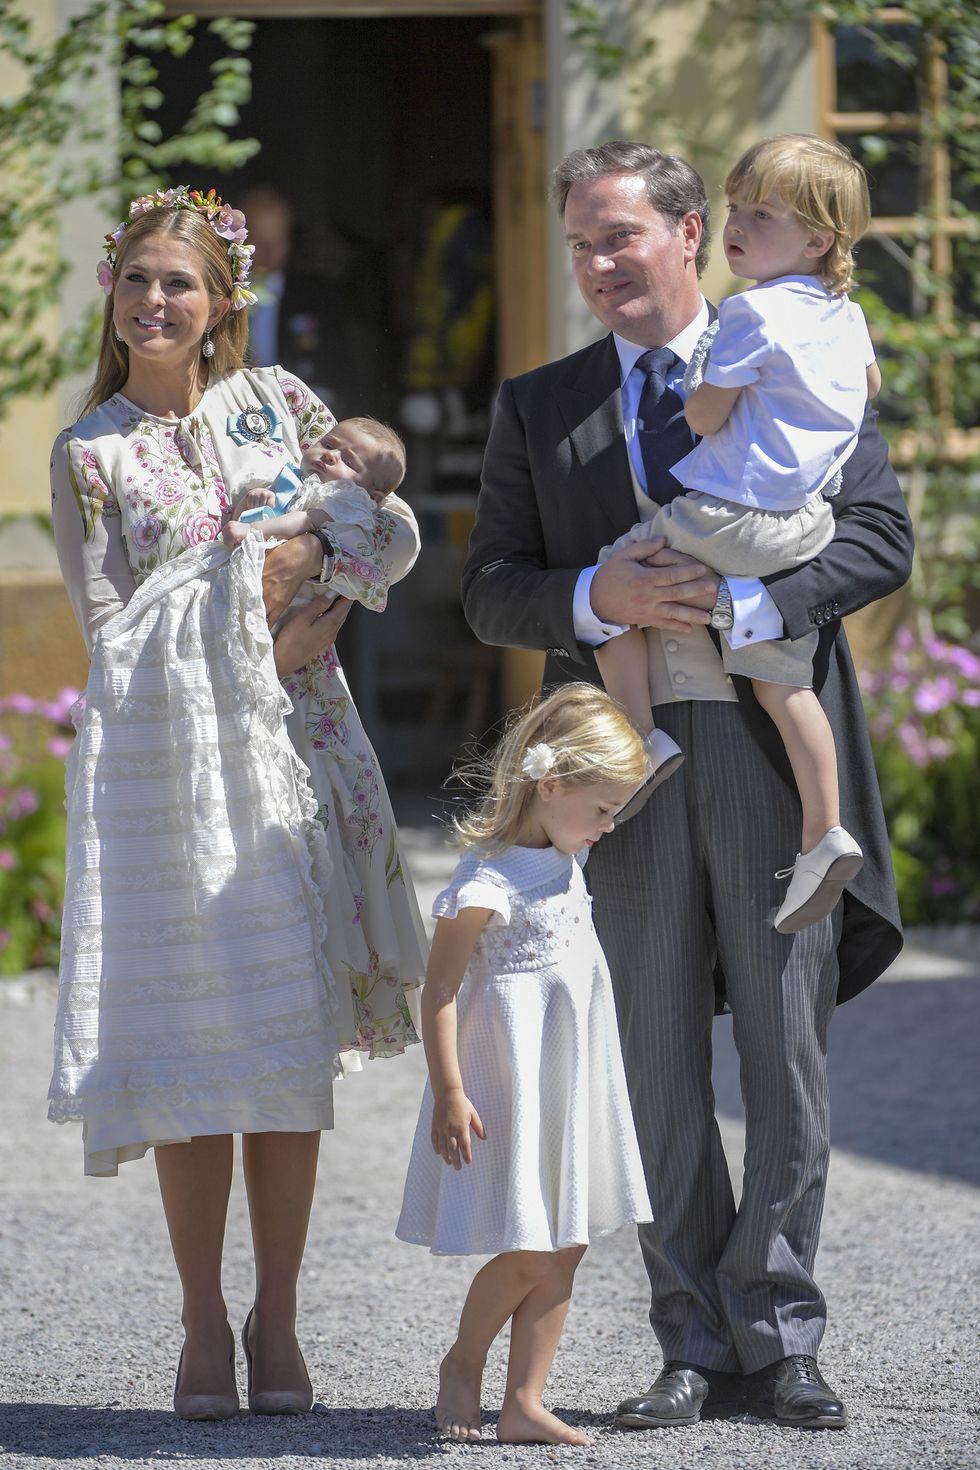 Princess Adrienne's Christening Portraits Released